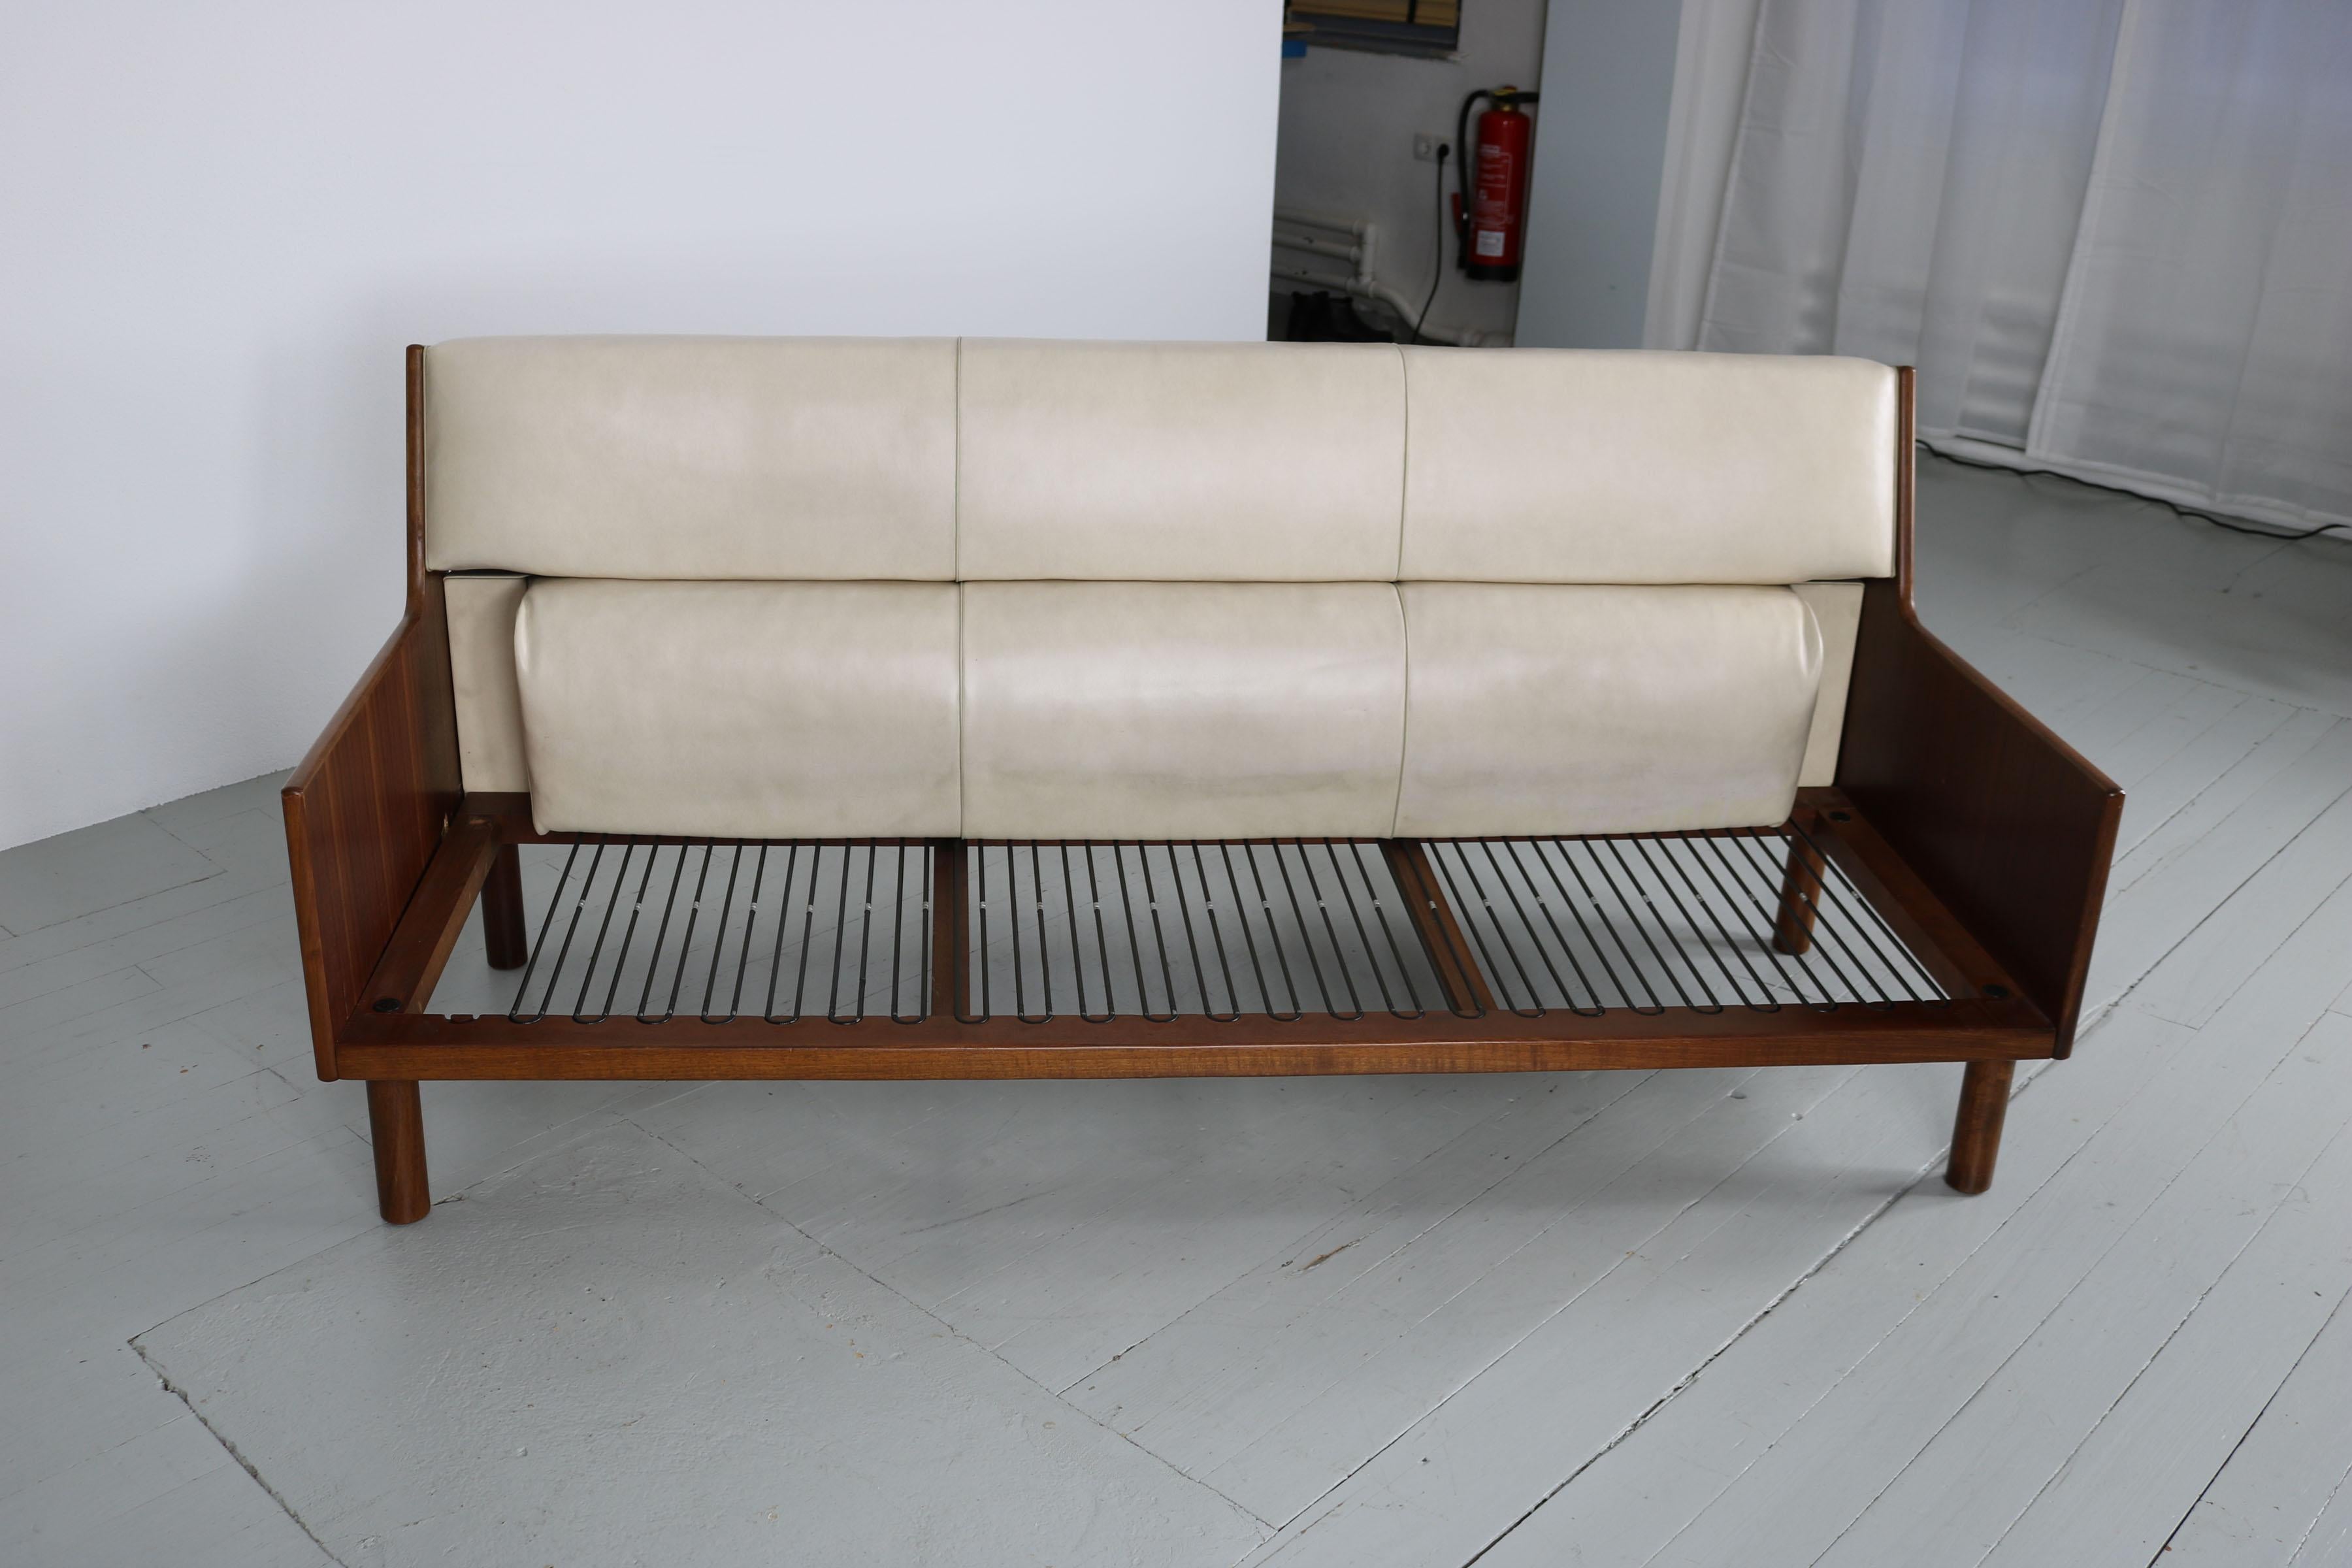 Set of 2 Armchairs and Couch, Manufactured by Anonima Castelli Bologna, 1950s For Sale 8